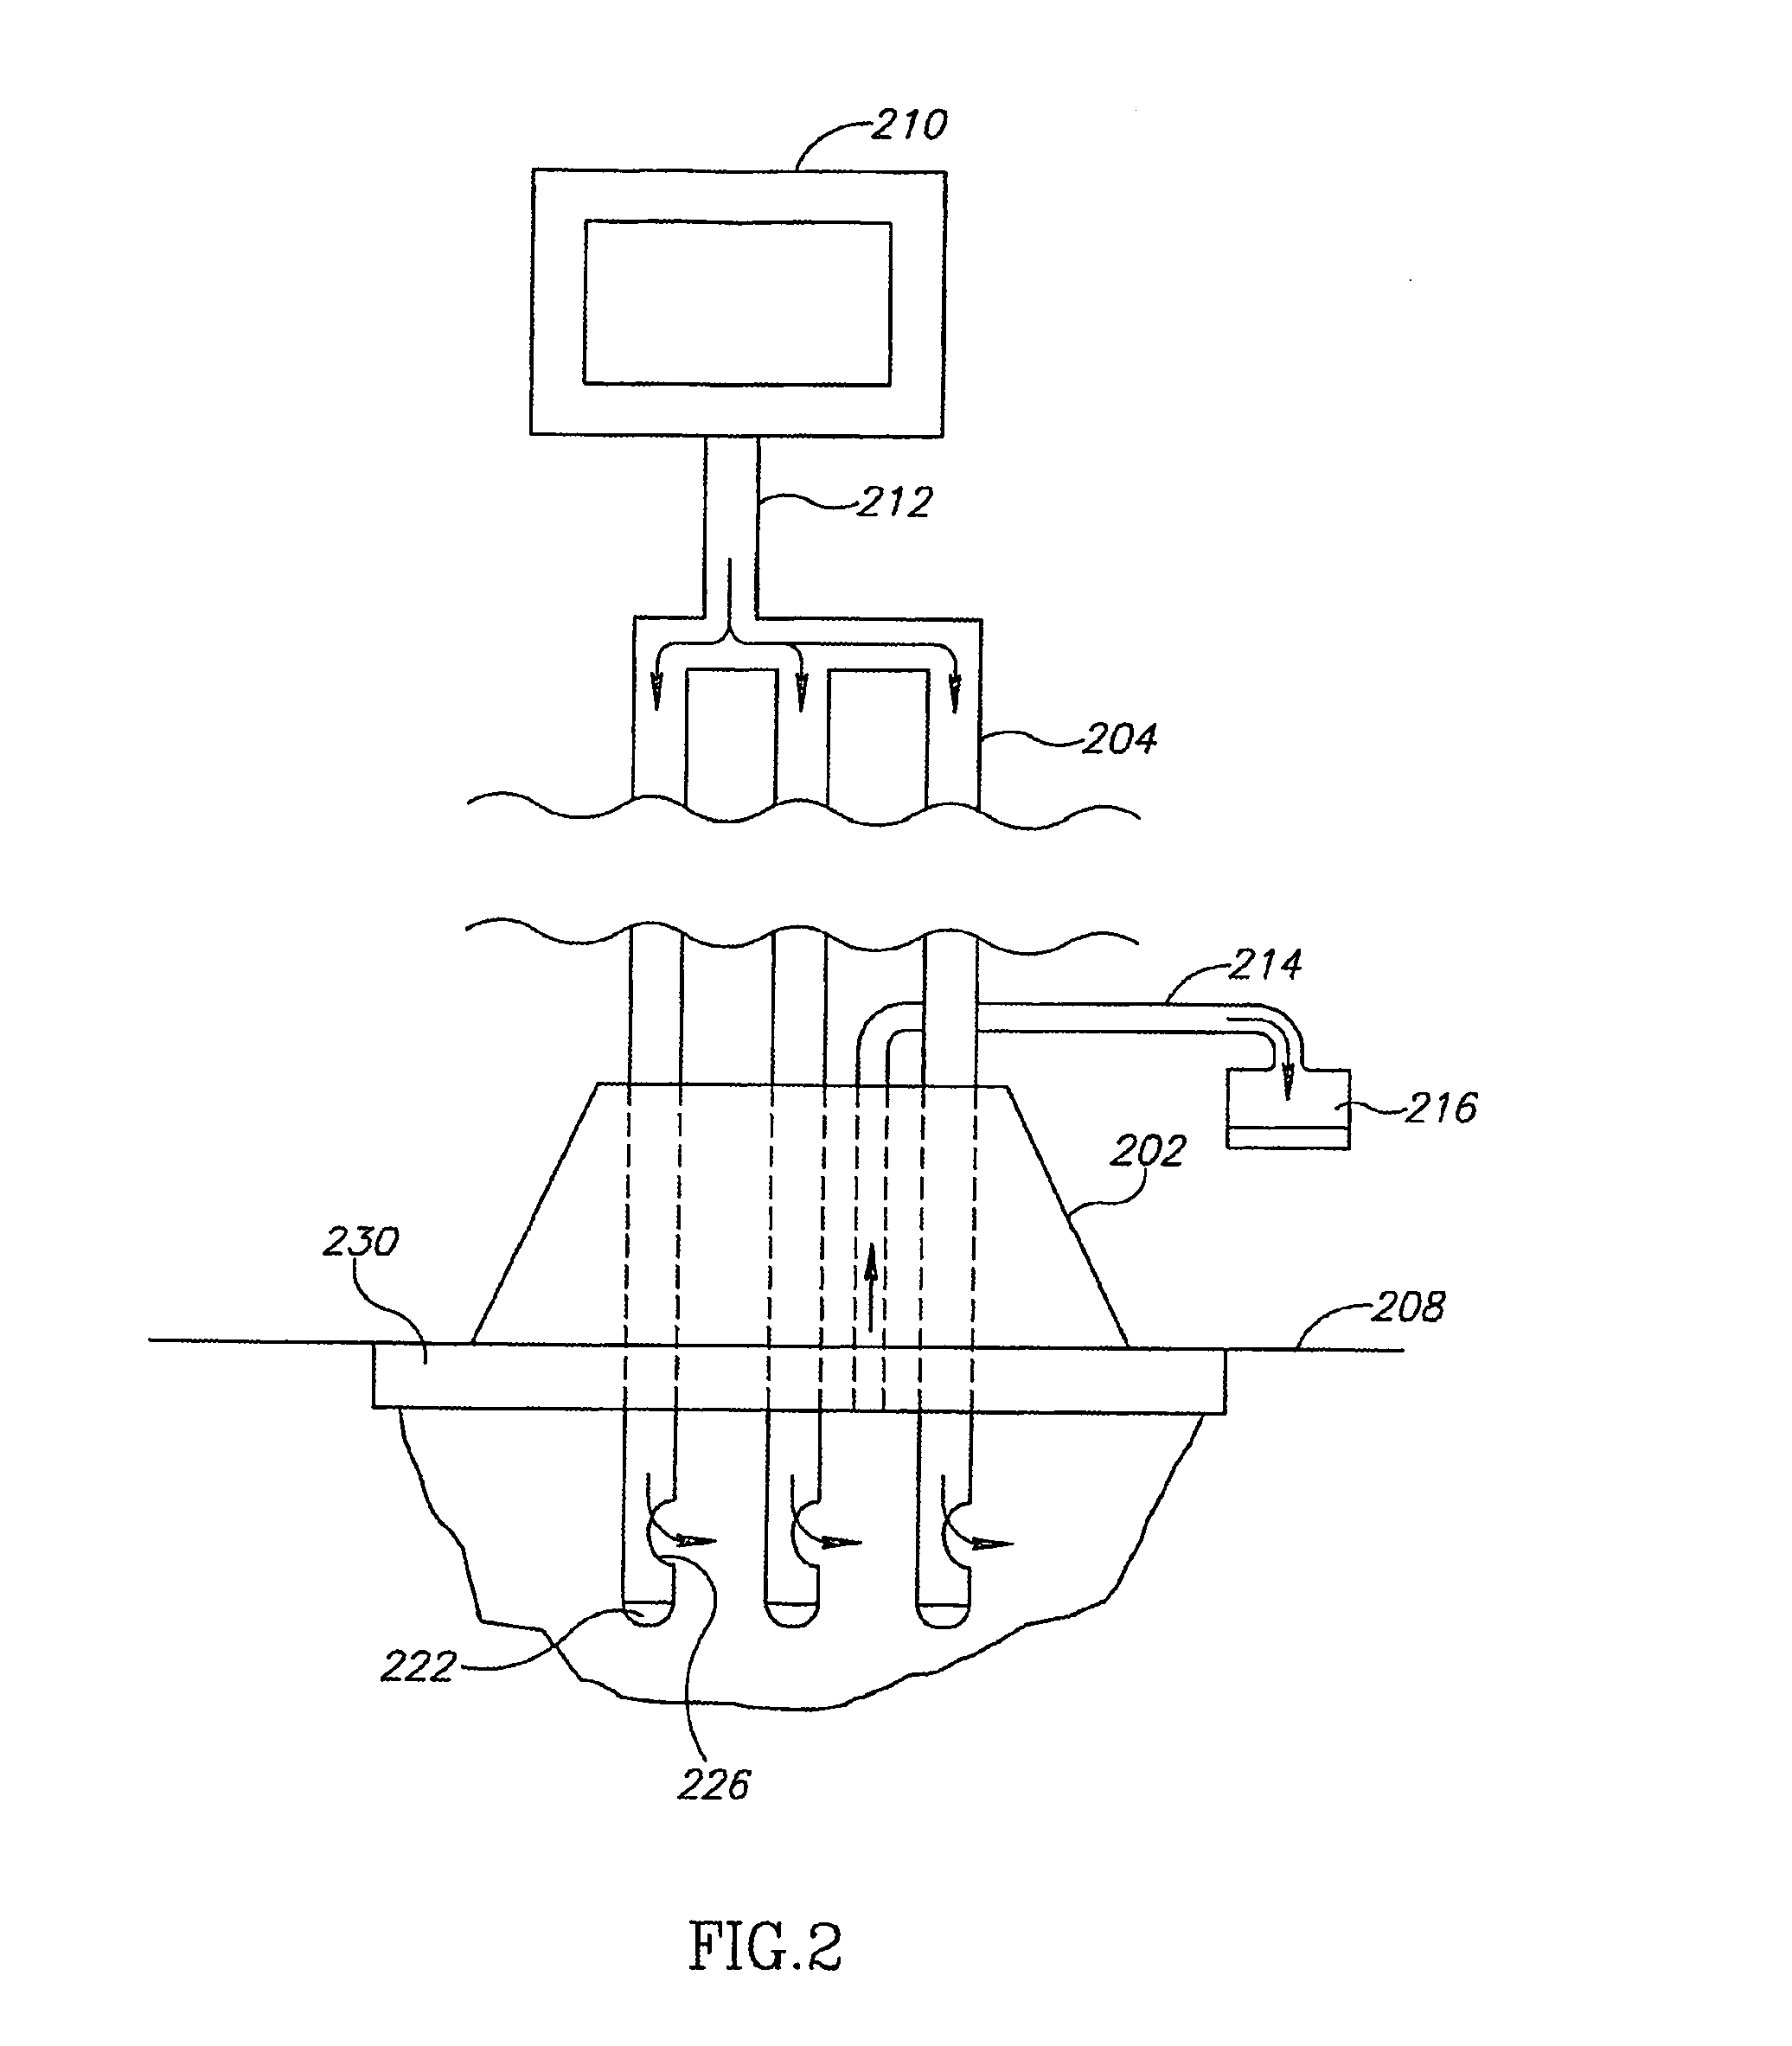 Apparatus and methods for enzymatic debridement of skin lesions